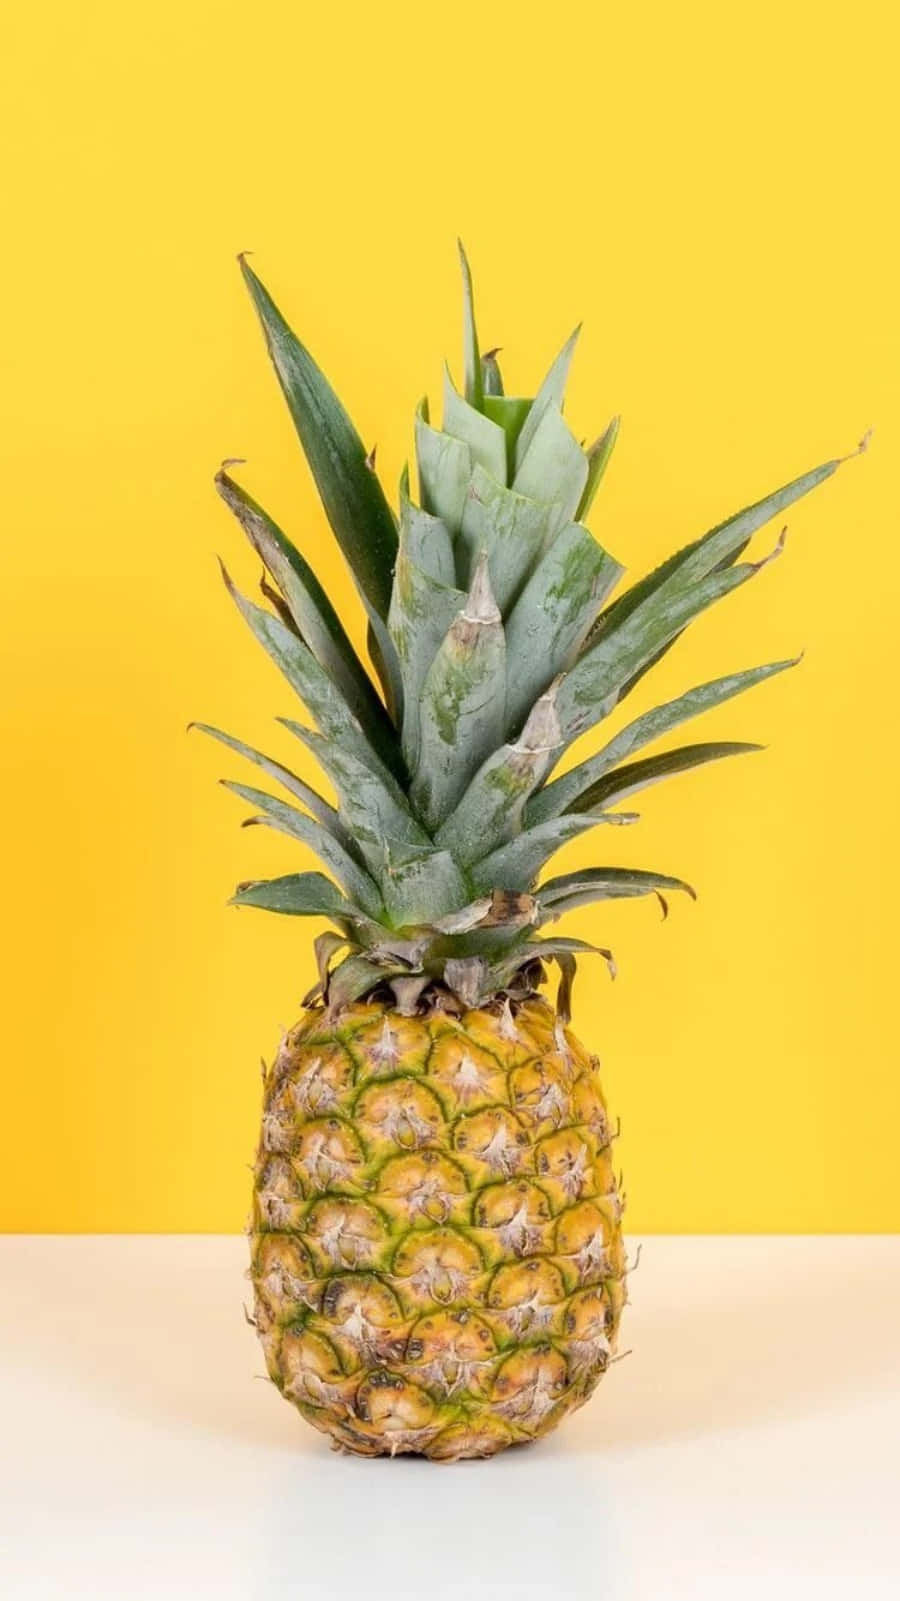 A bright, ripe and juicy pineapple for a refreshing snack